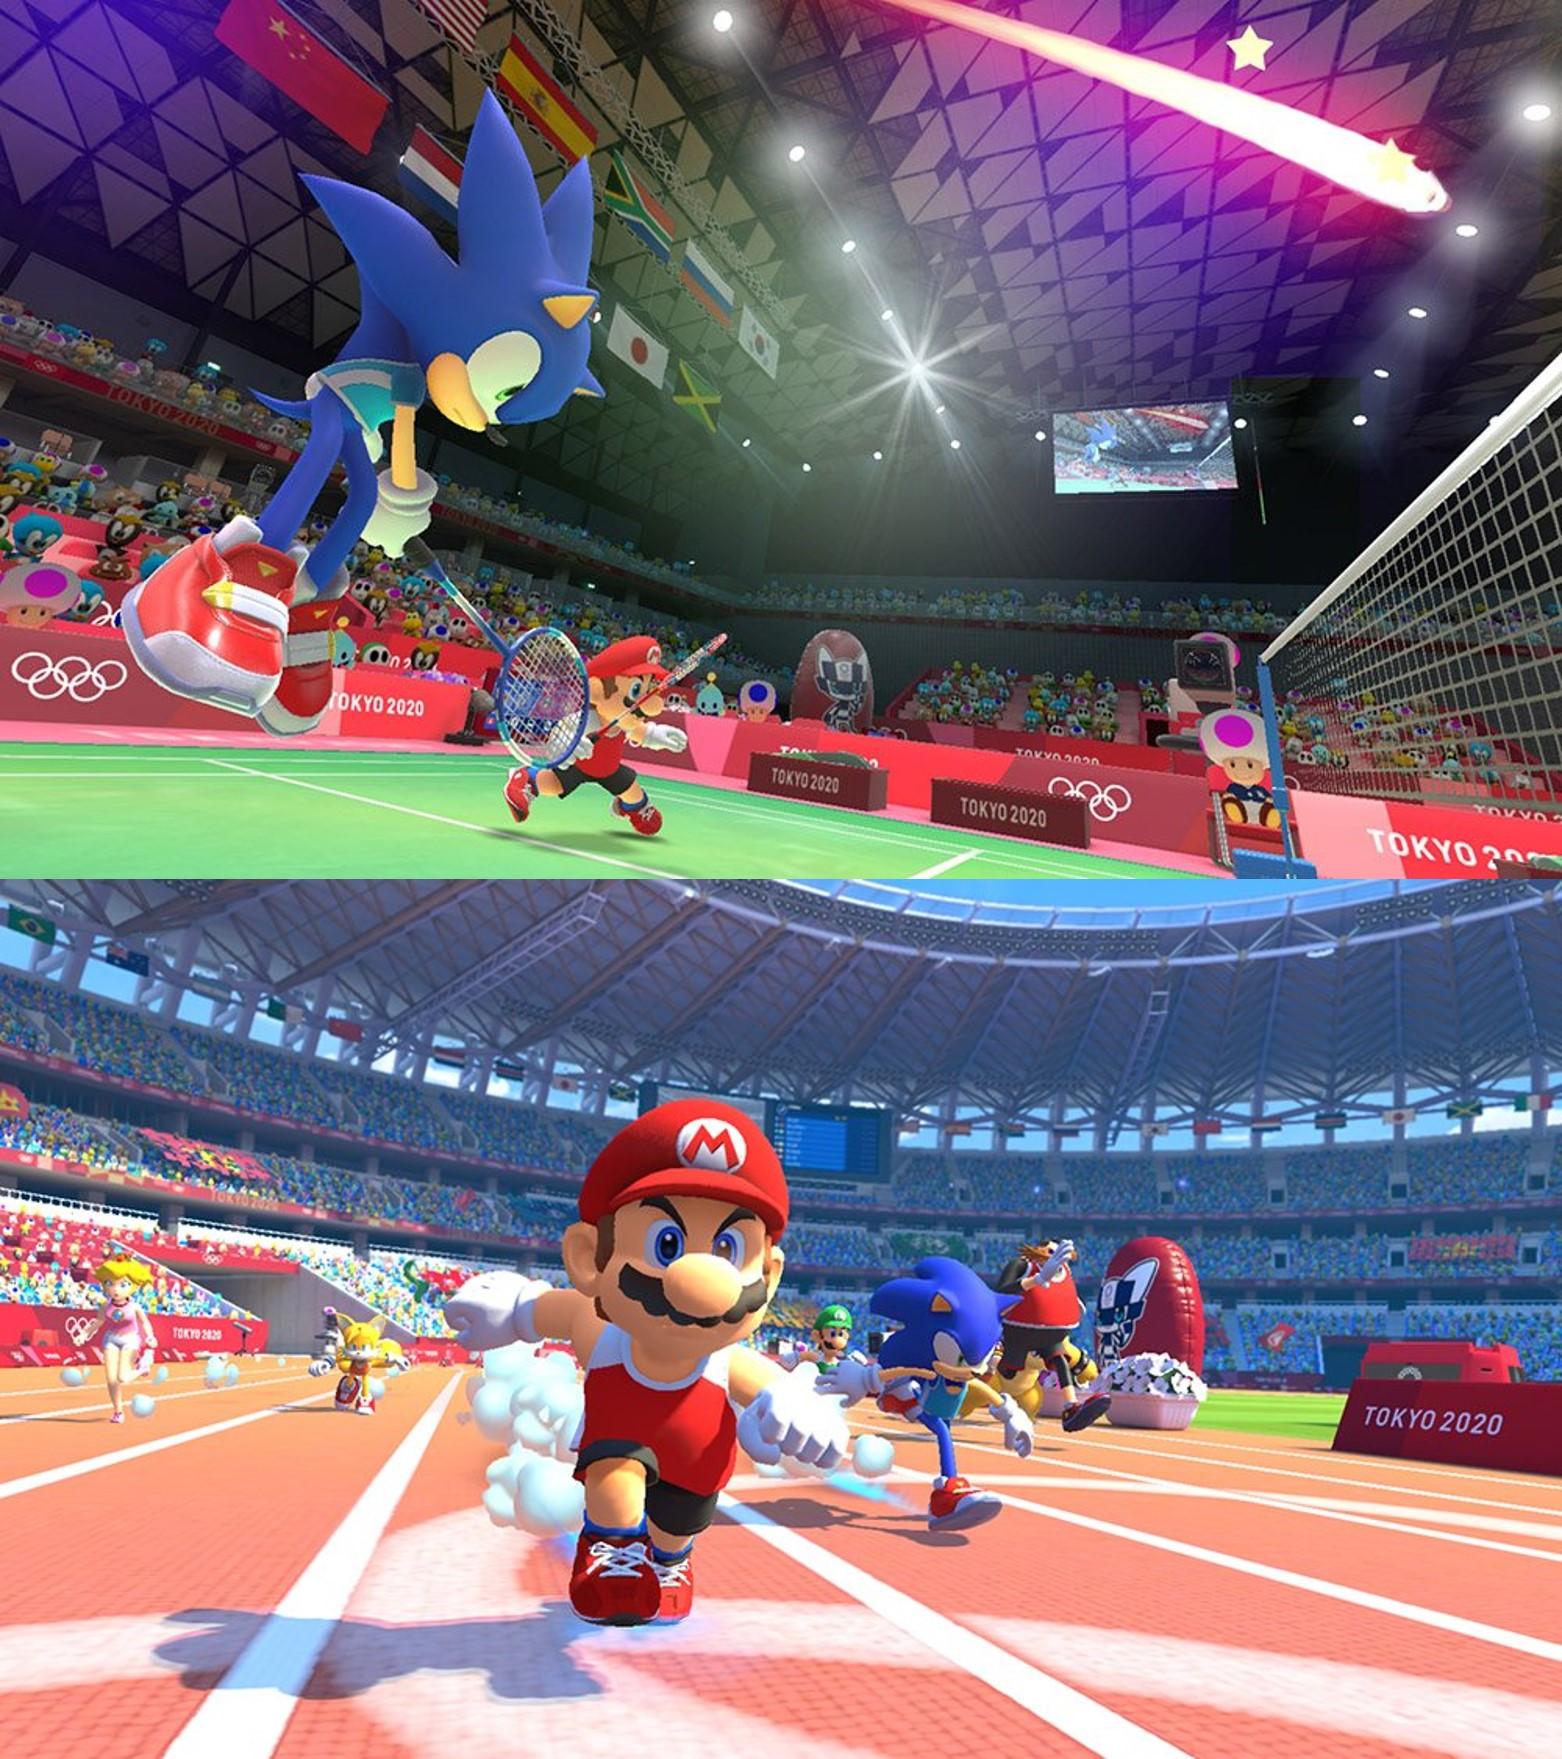 Here are two screenshots of the upcoming Mario & Sonic at